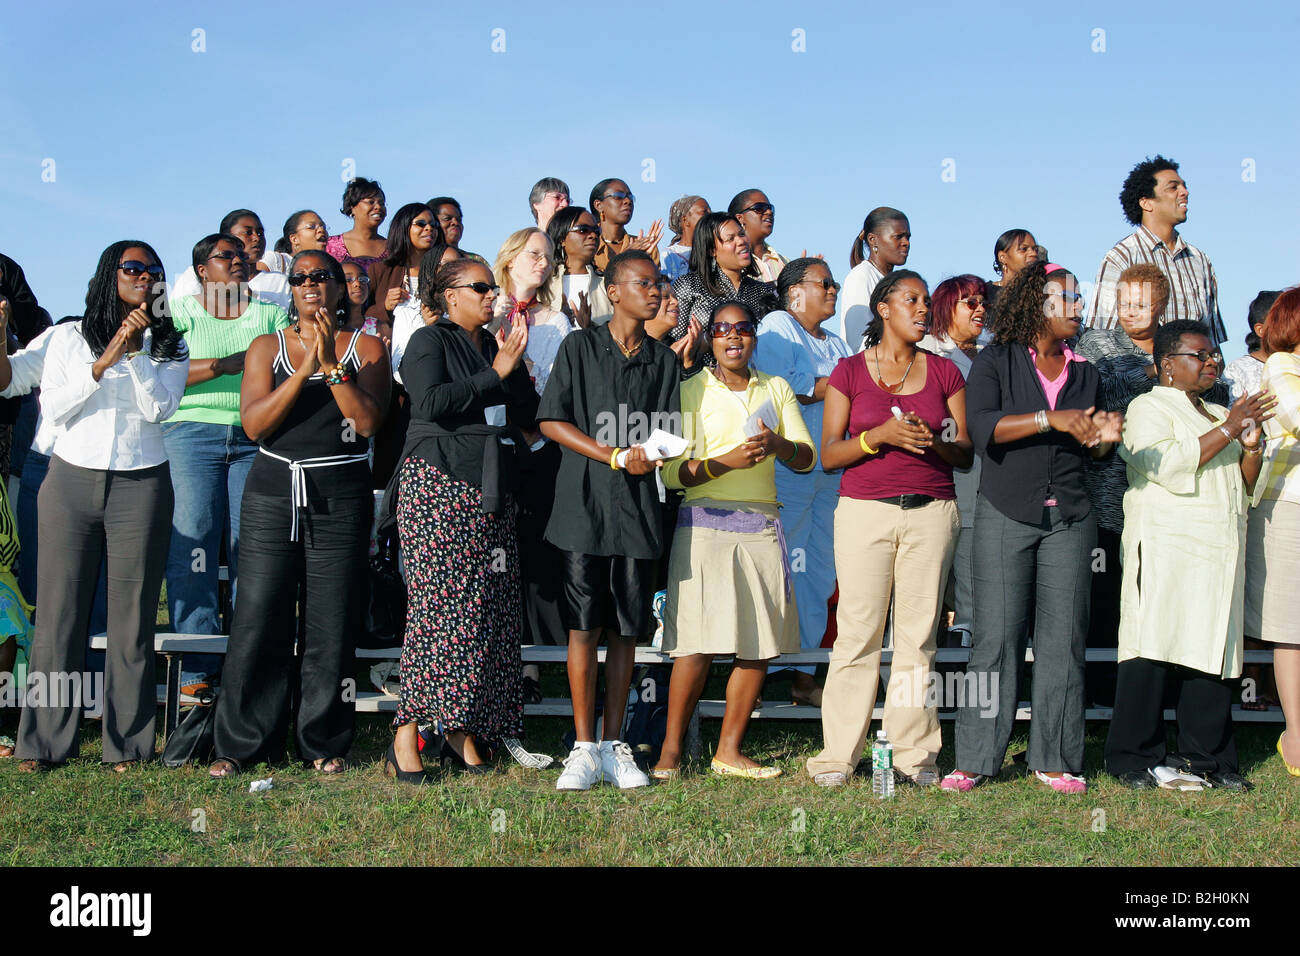 A multiracial group sings during an outdoor prayer service Stock Photo